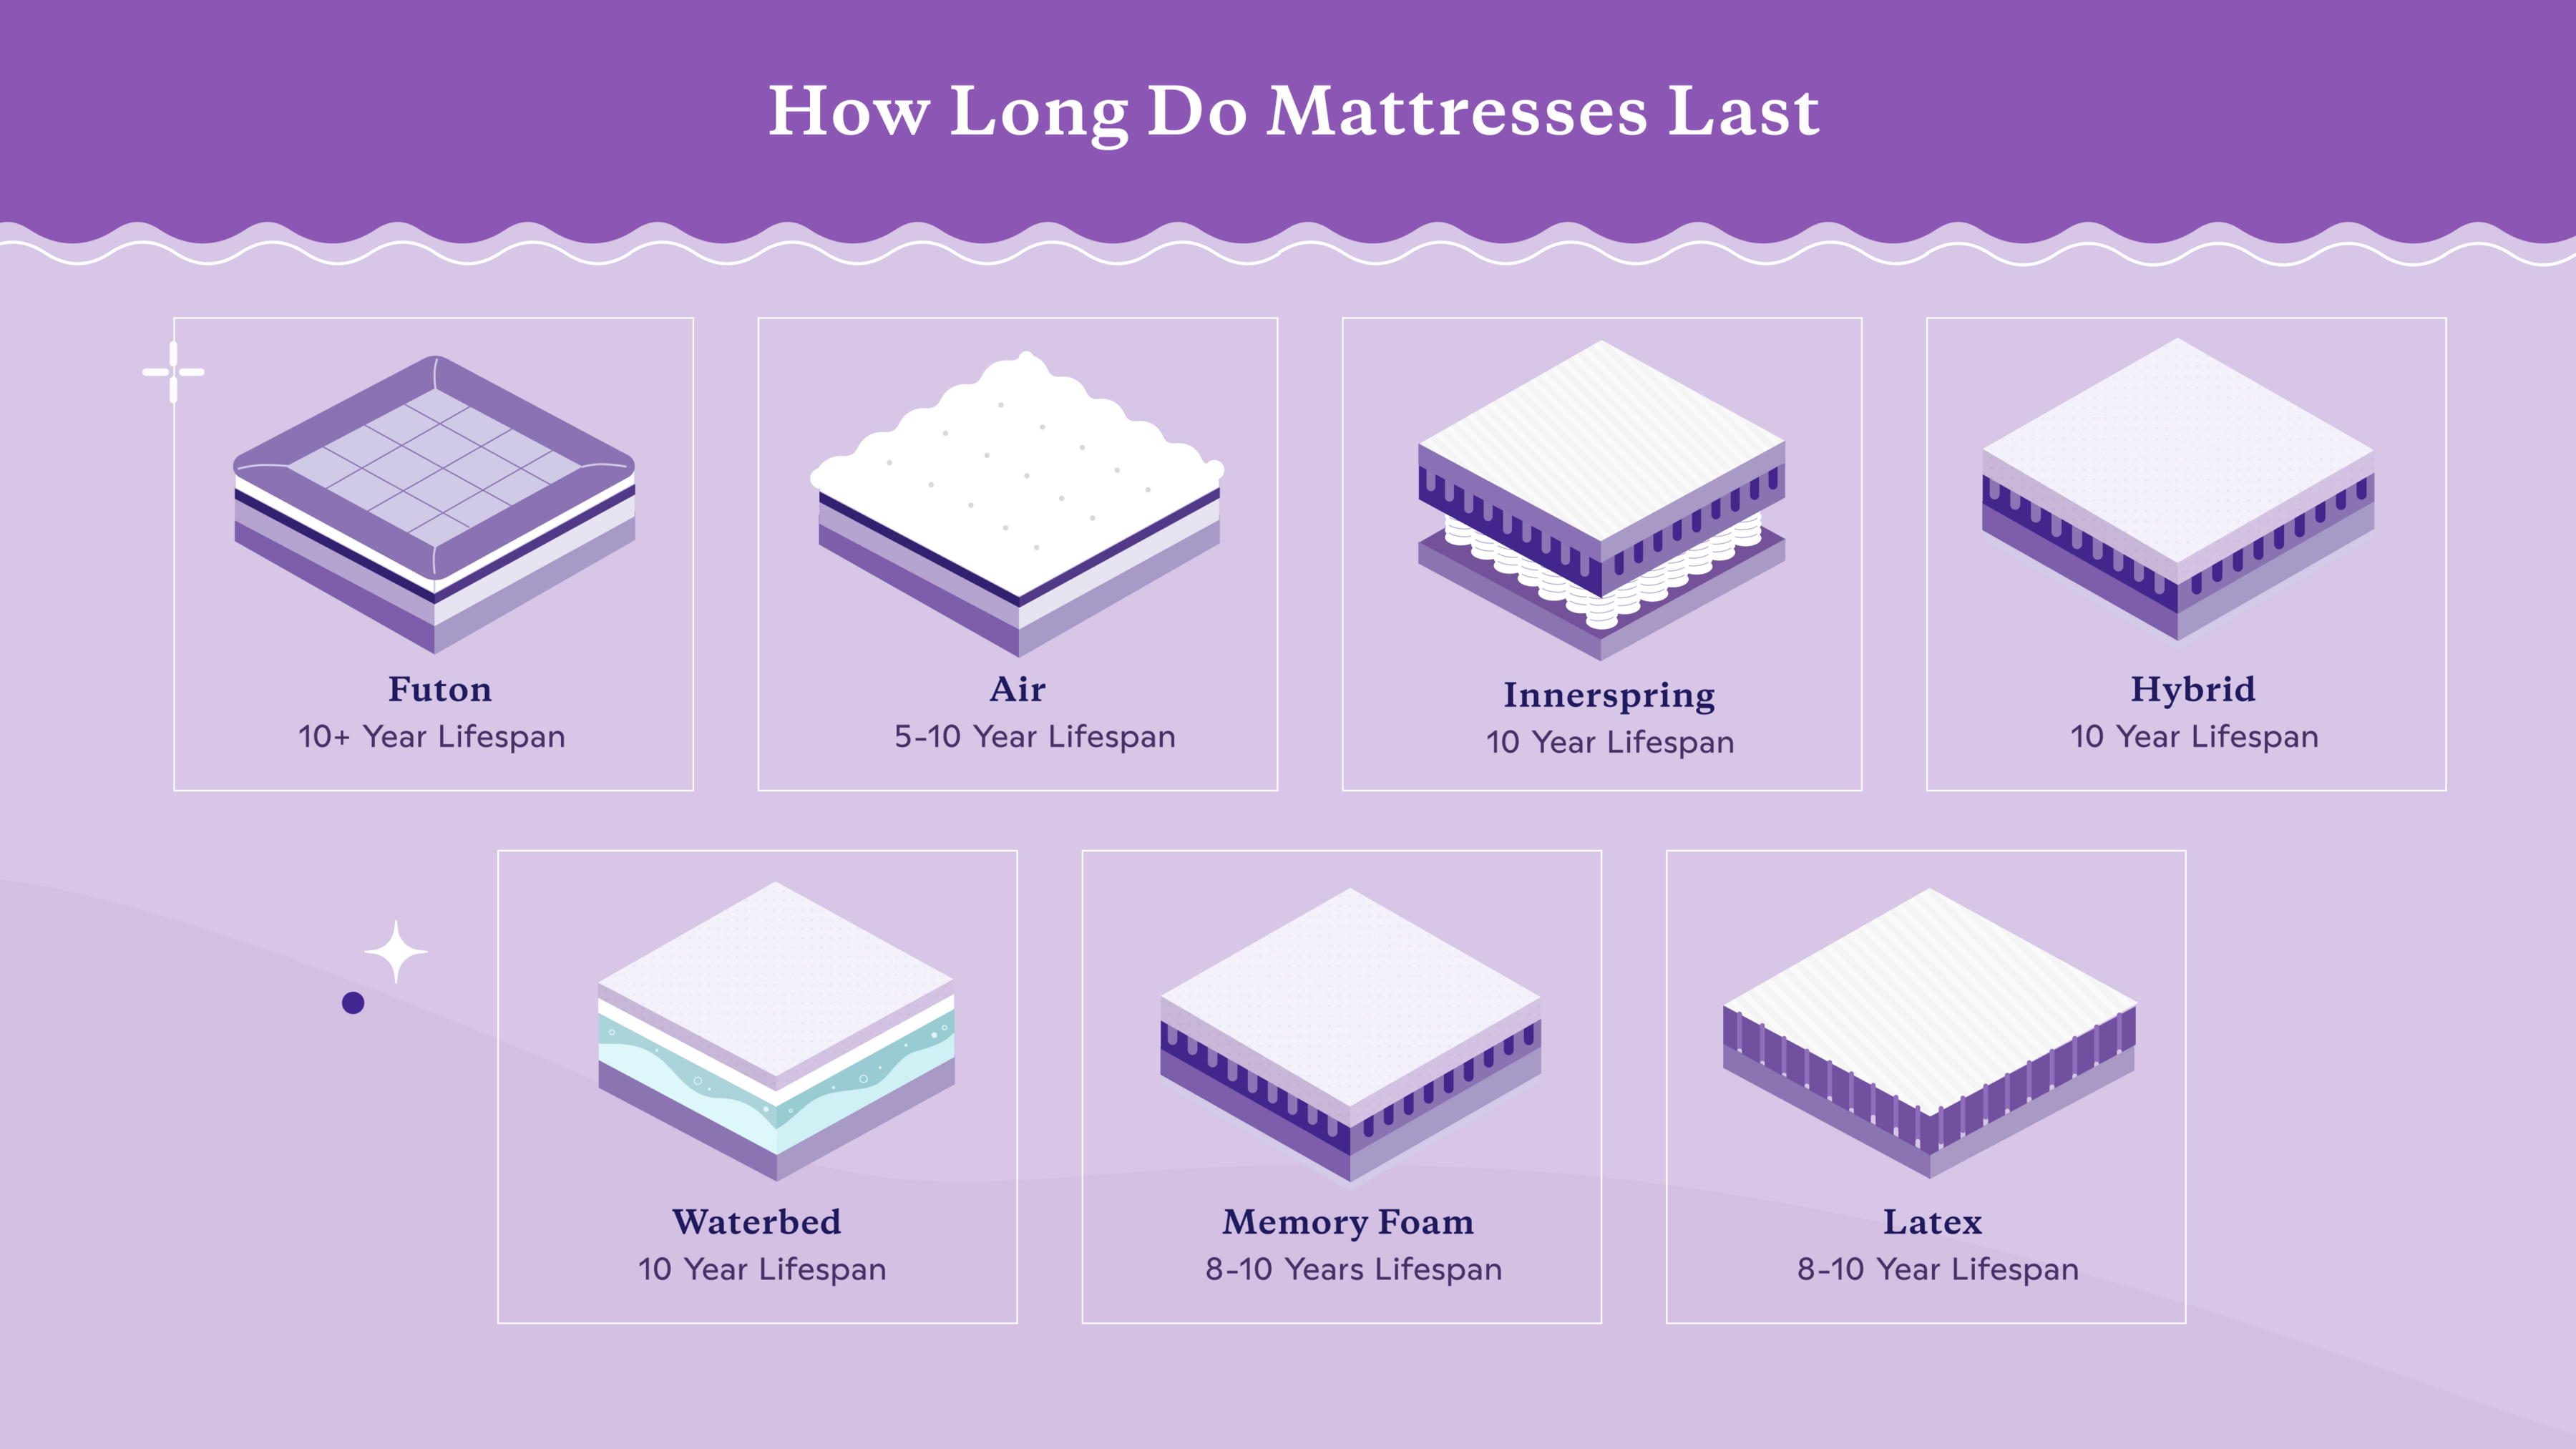 How long a mattress lasts by type